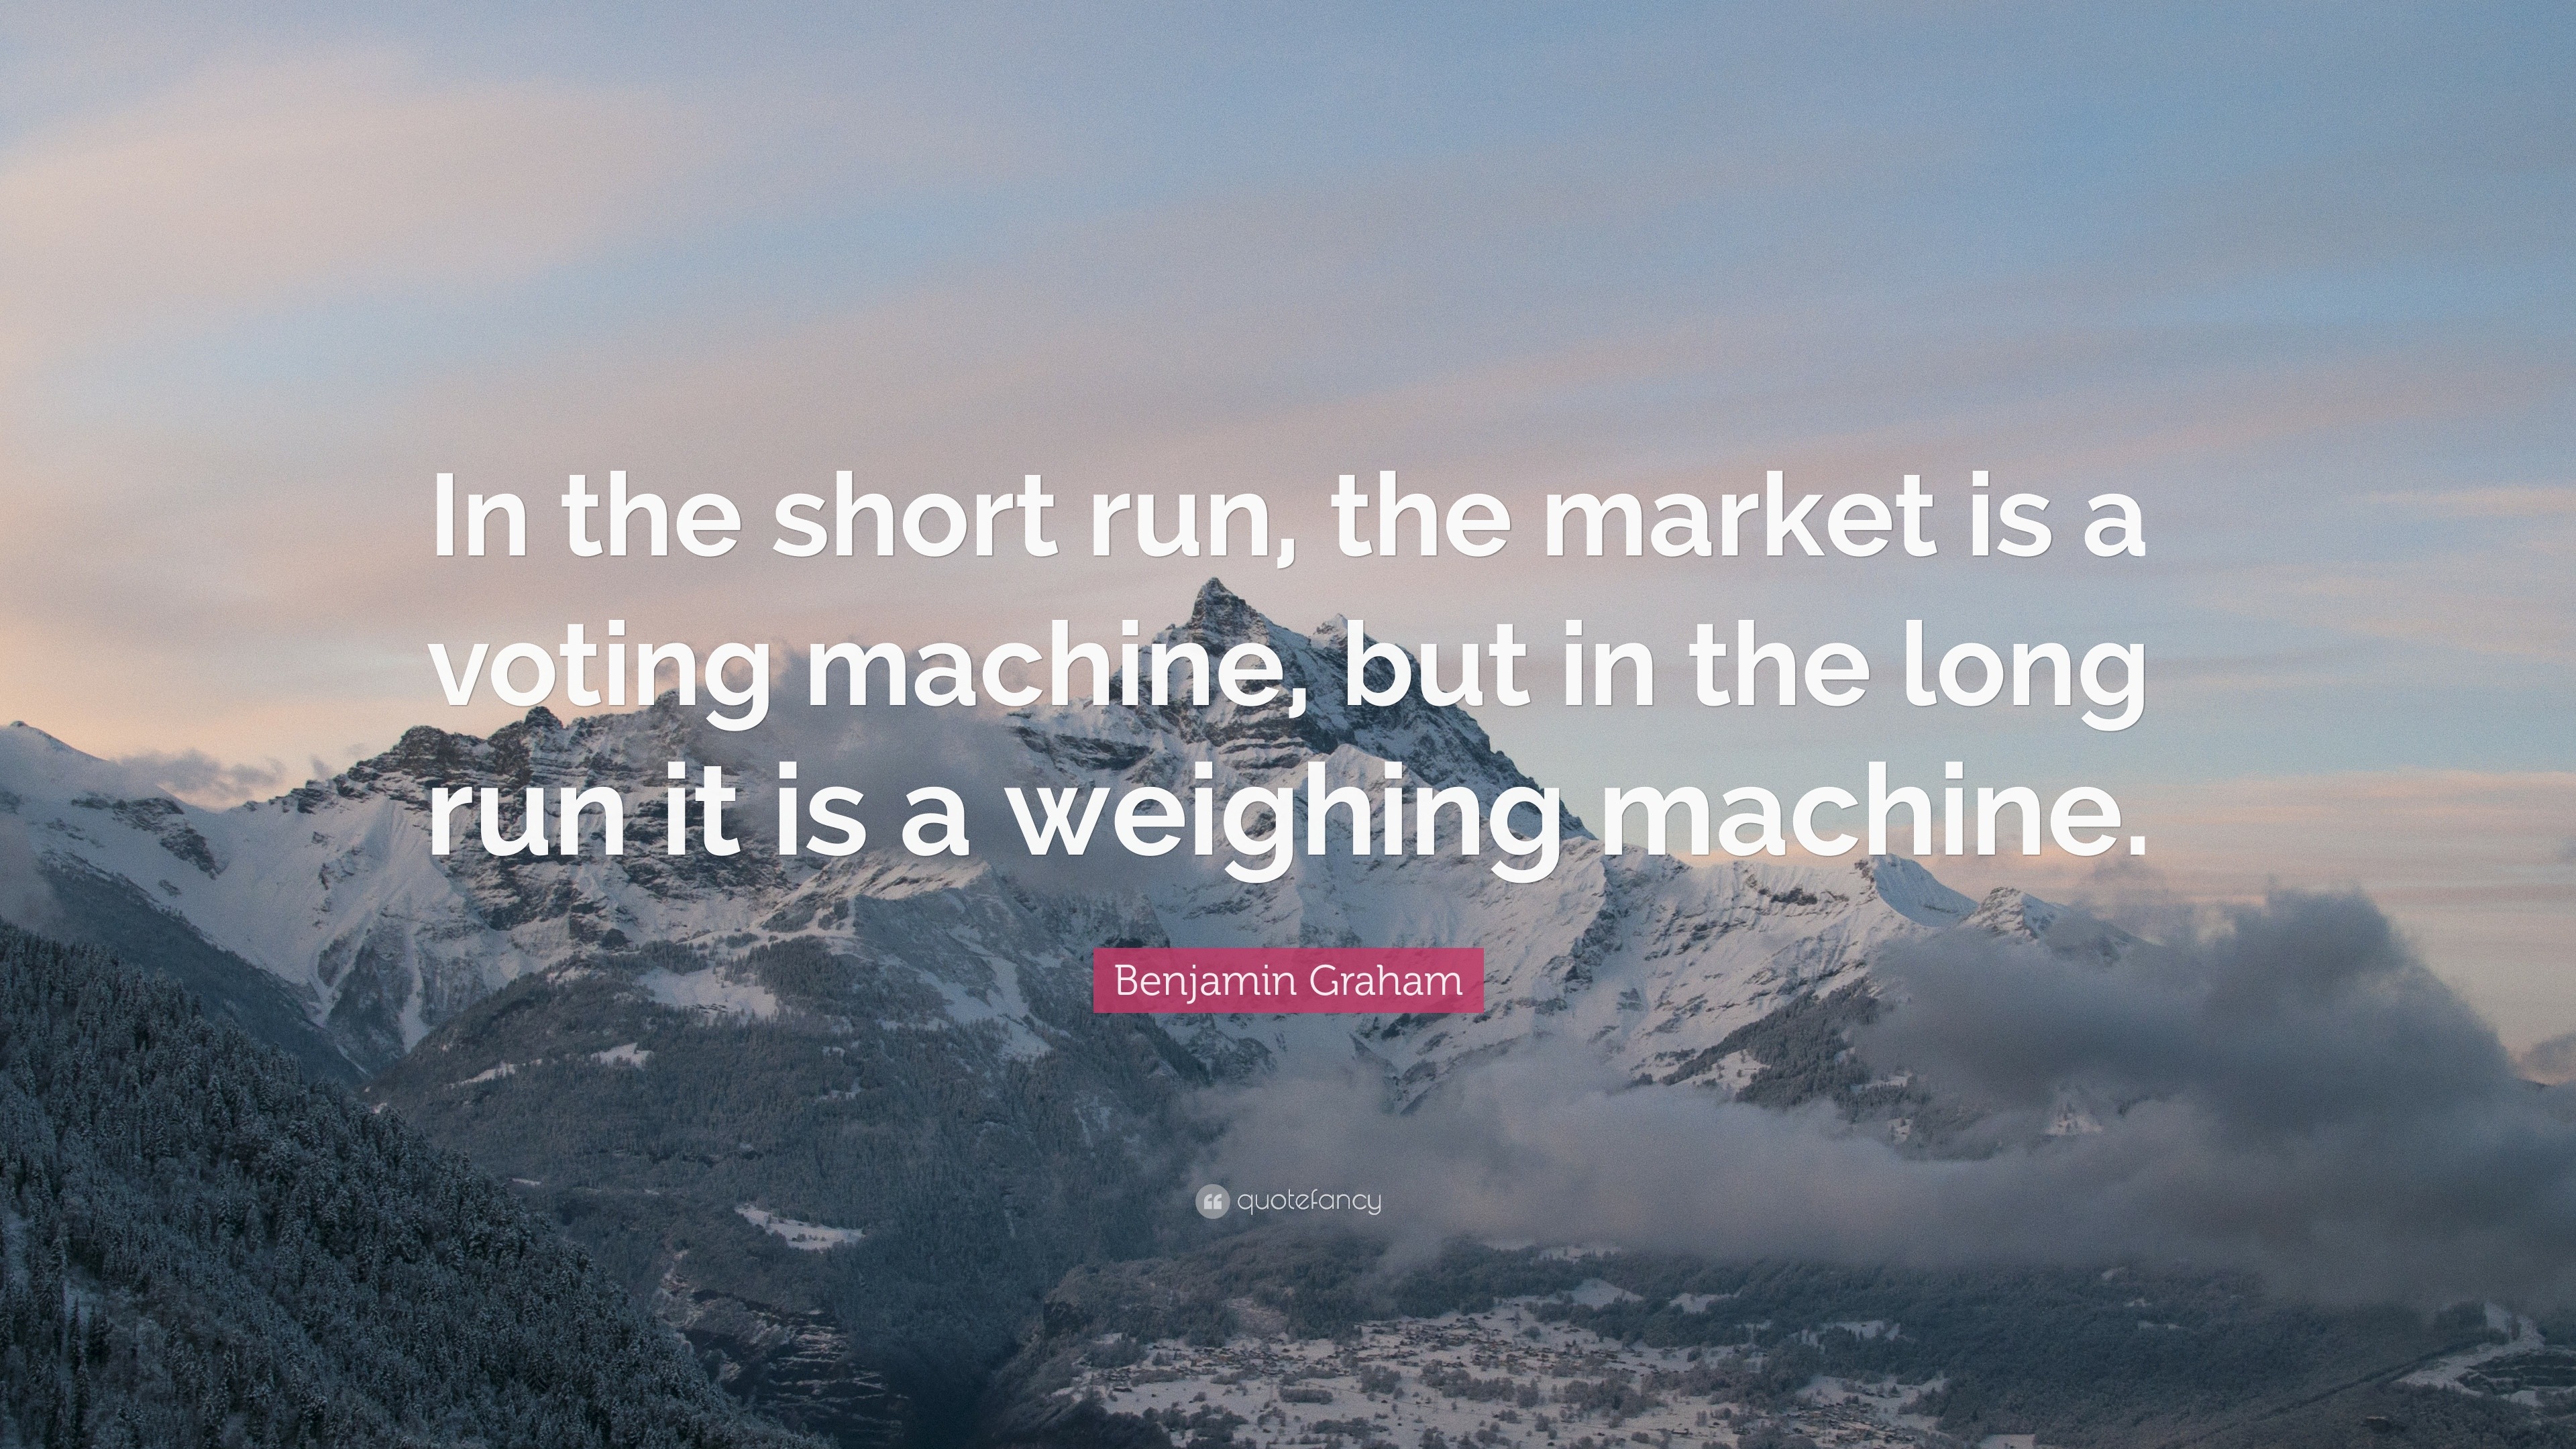 Benjamin Graham Quote: “In the short run, the market is a voting machine,  but in the